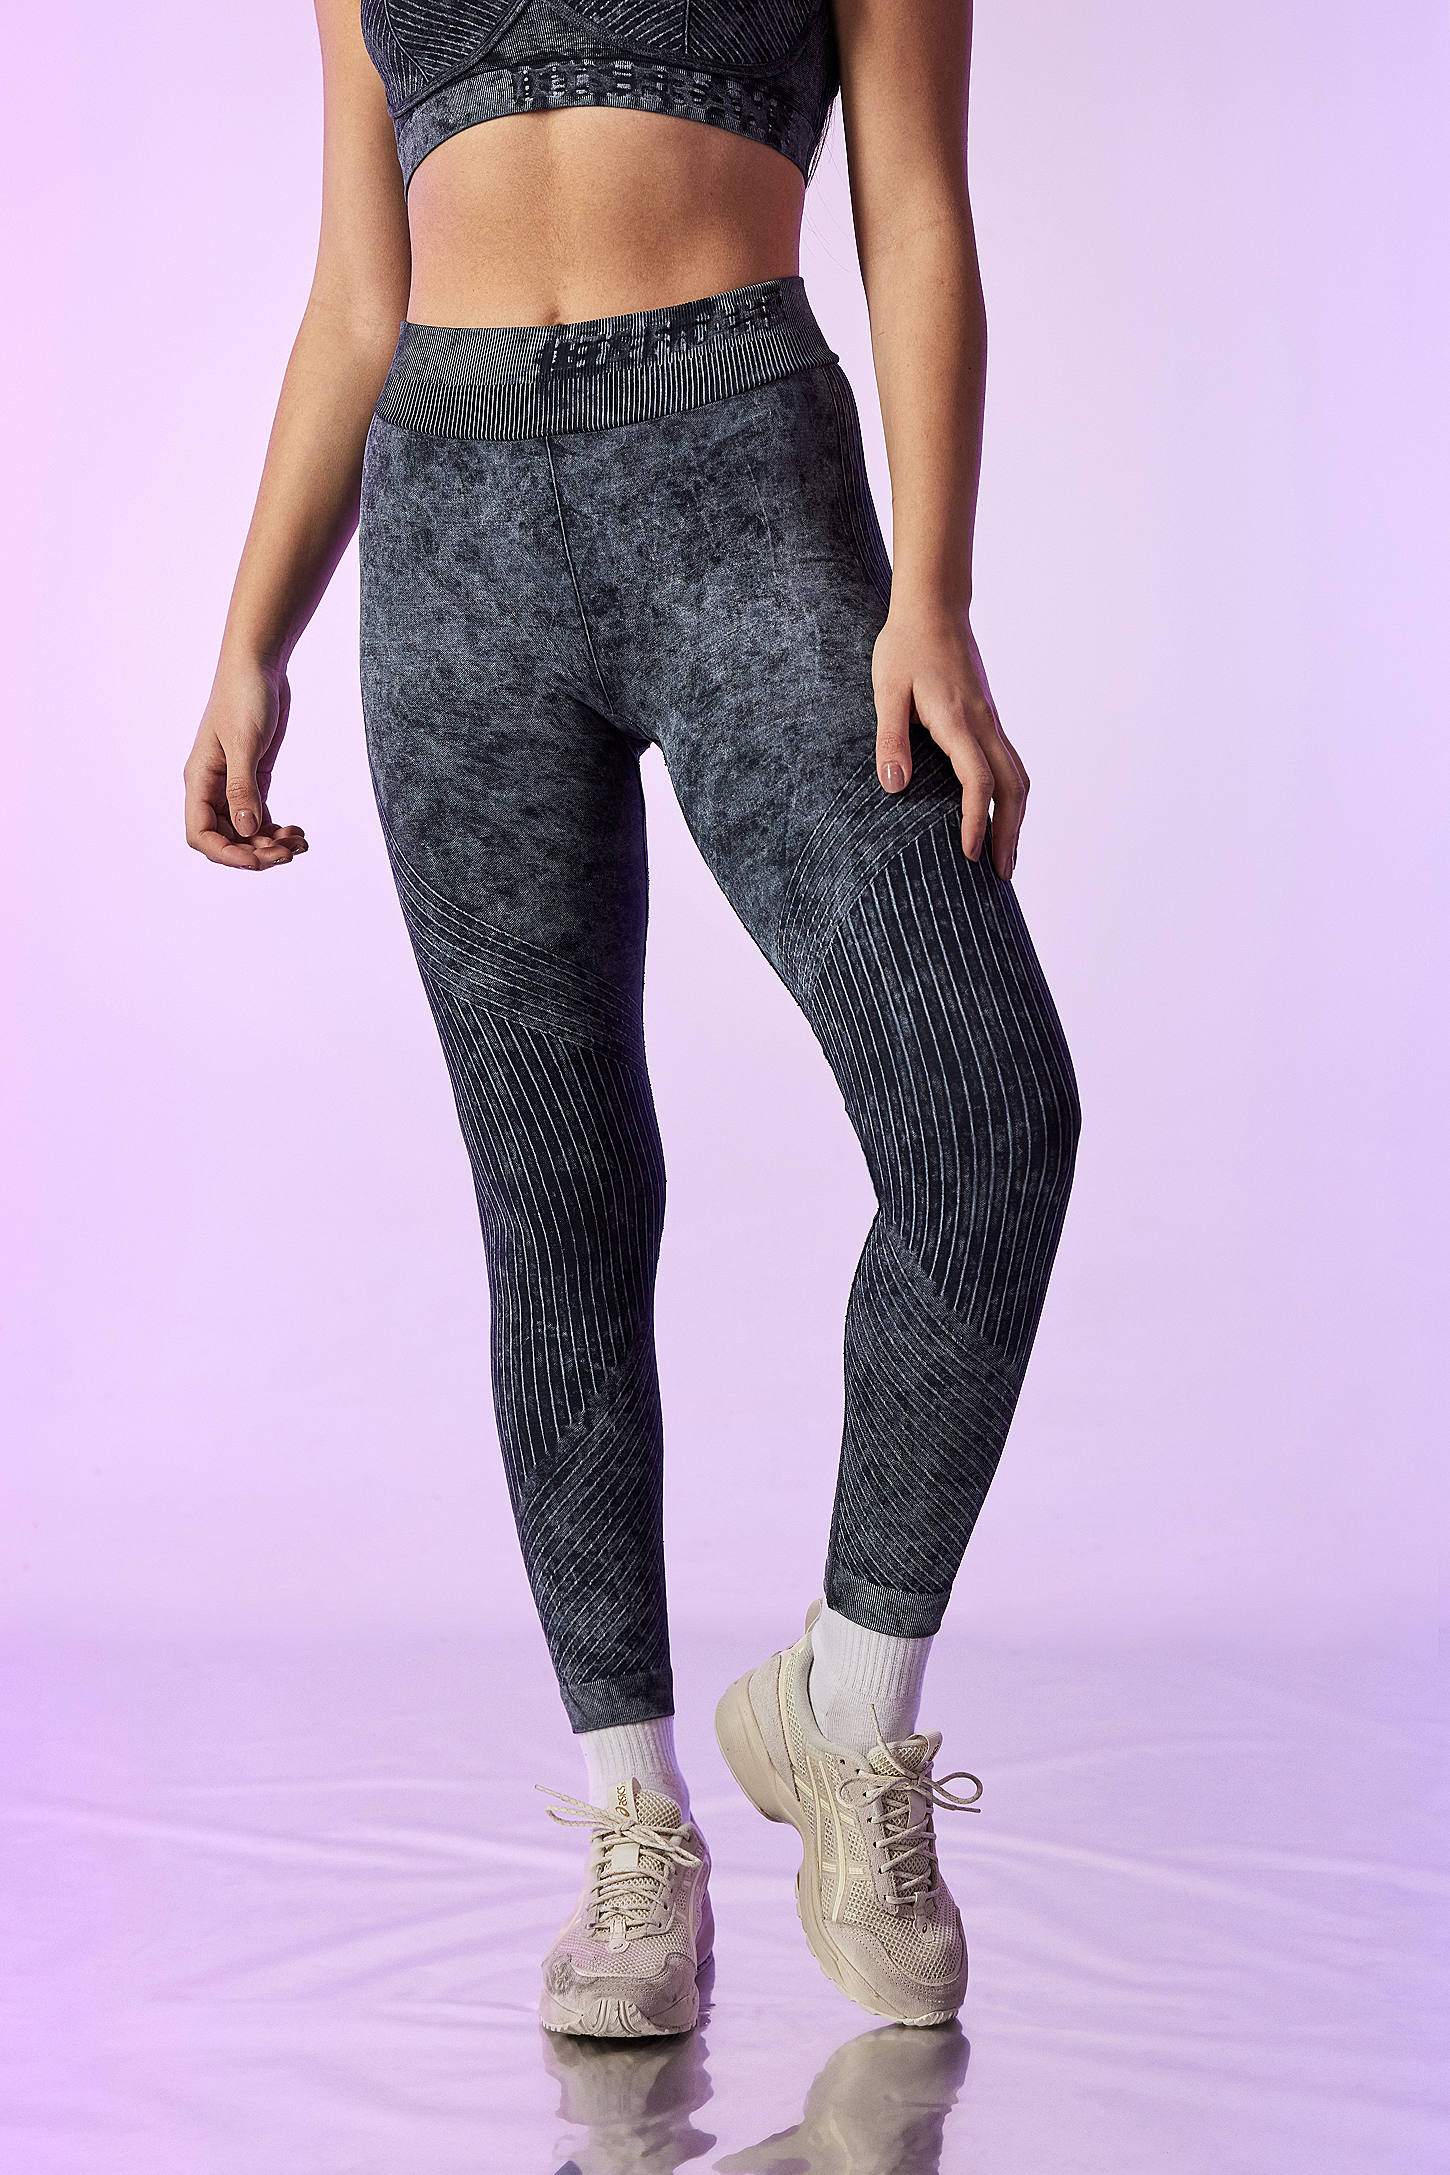 iets frans SPORT Acid Wash Contoured Leggings, Urban Outfitters